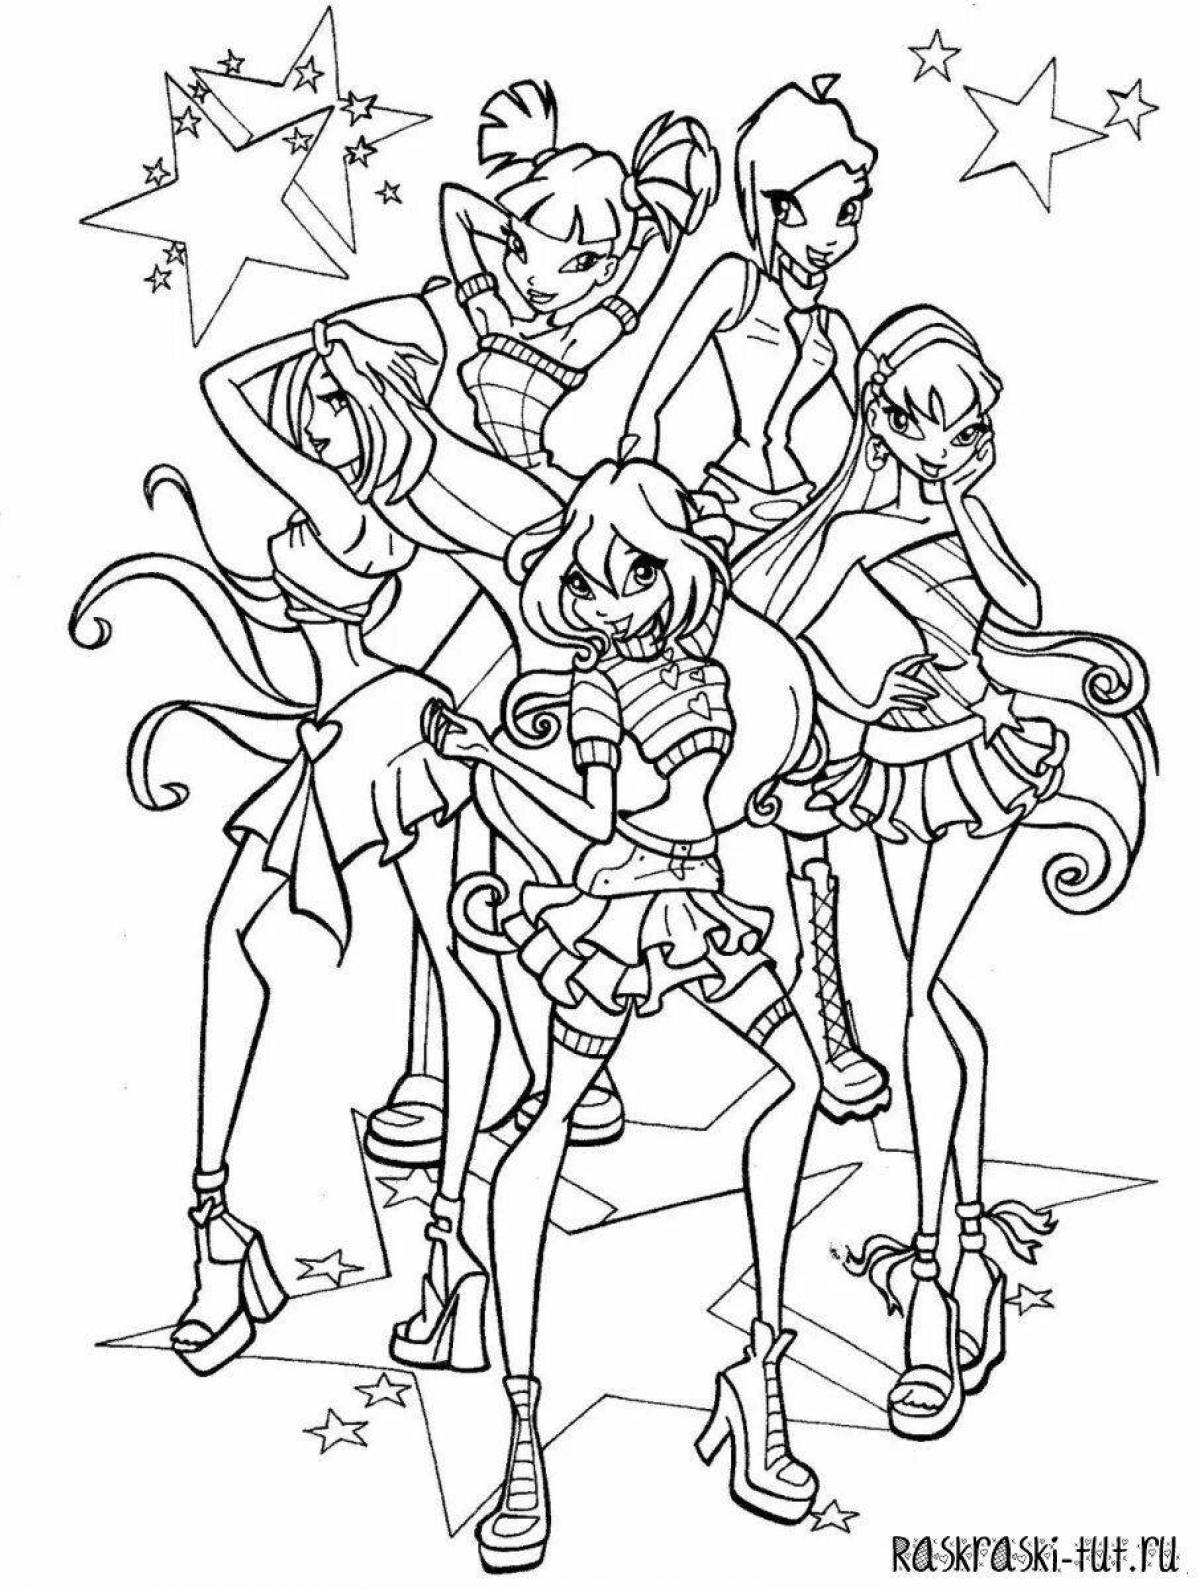 Colorful Winx coloring book